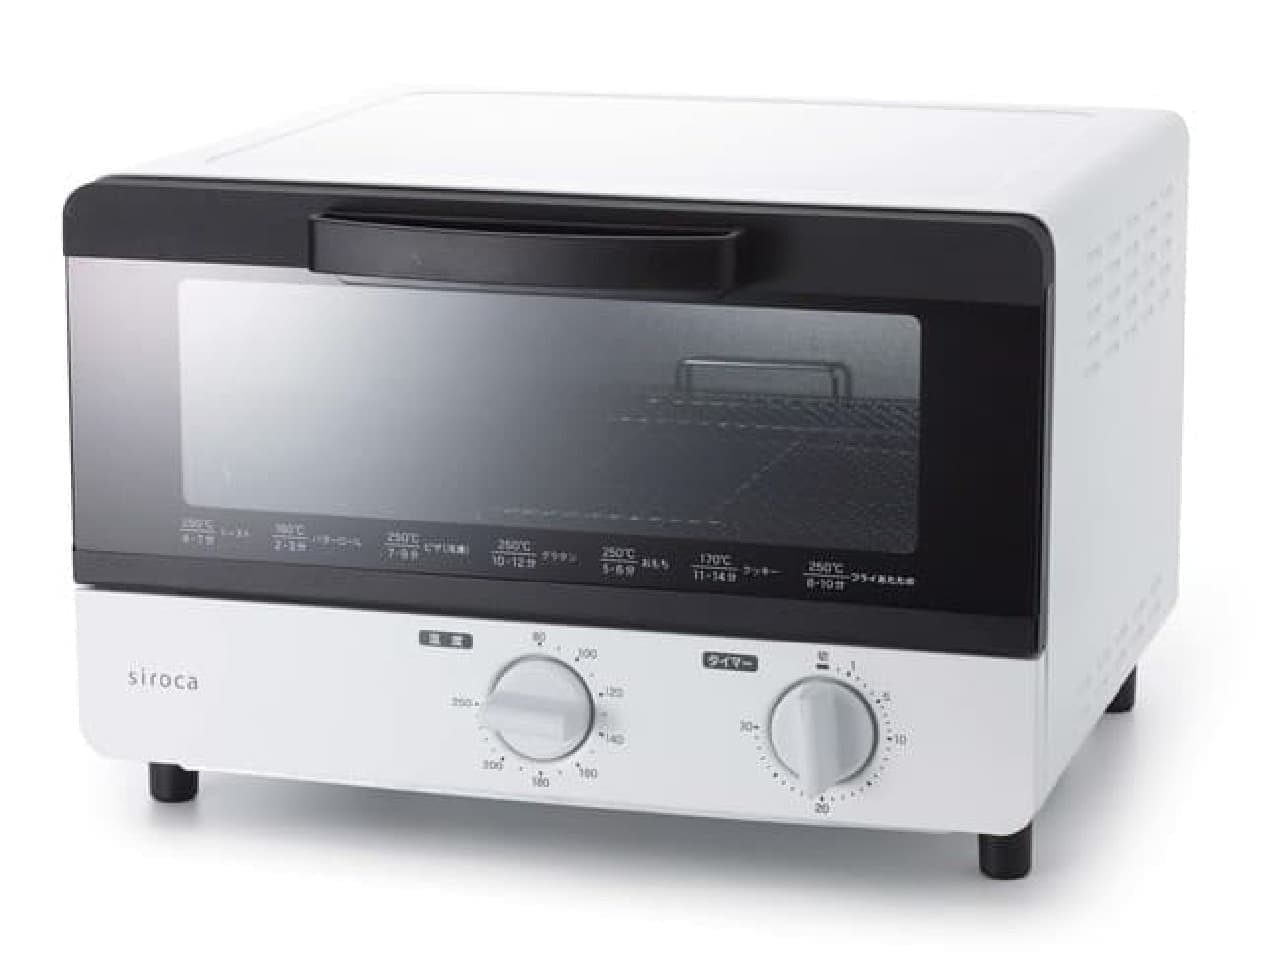 Siroka's New Toaster Oven -- 4 pieces of toast at once! Simple functions & easy to clean